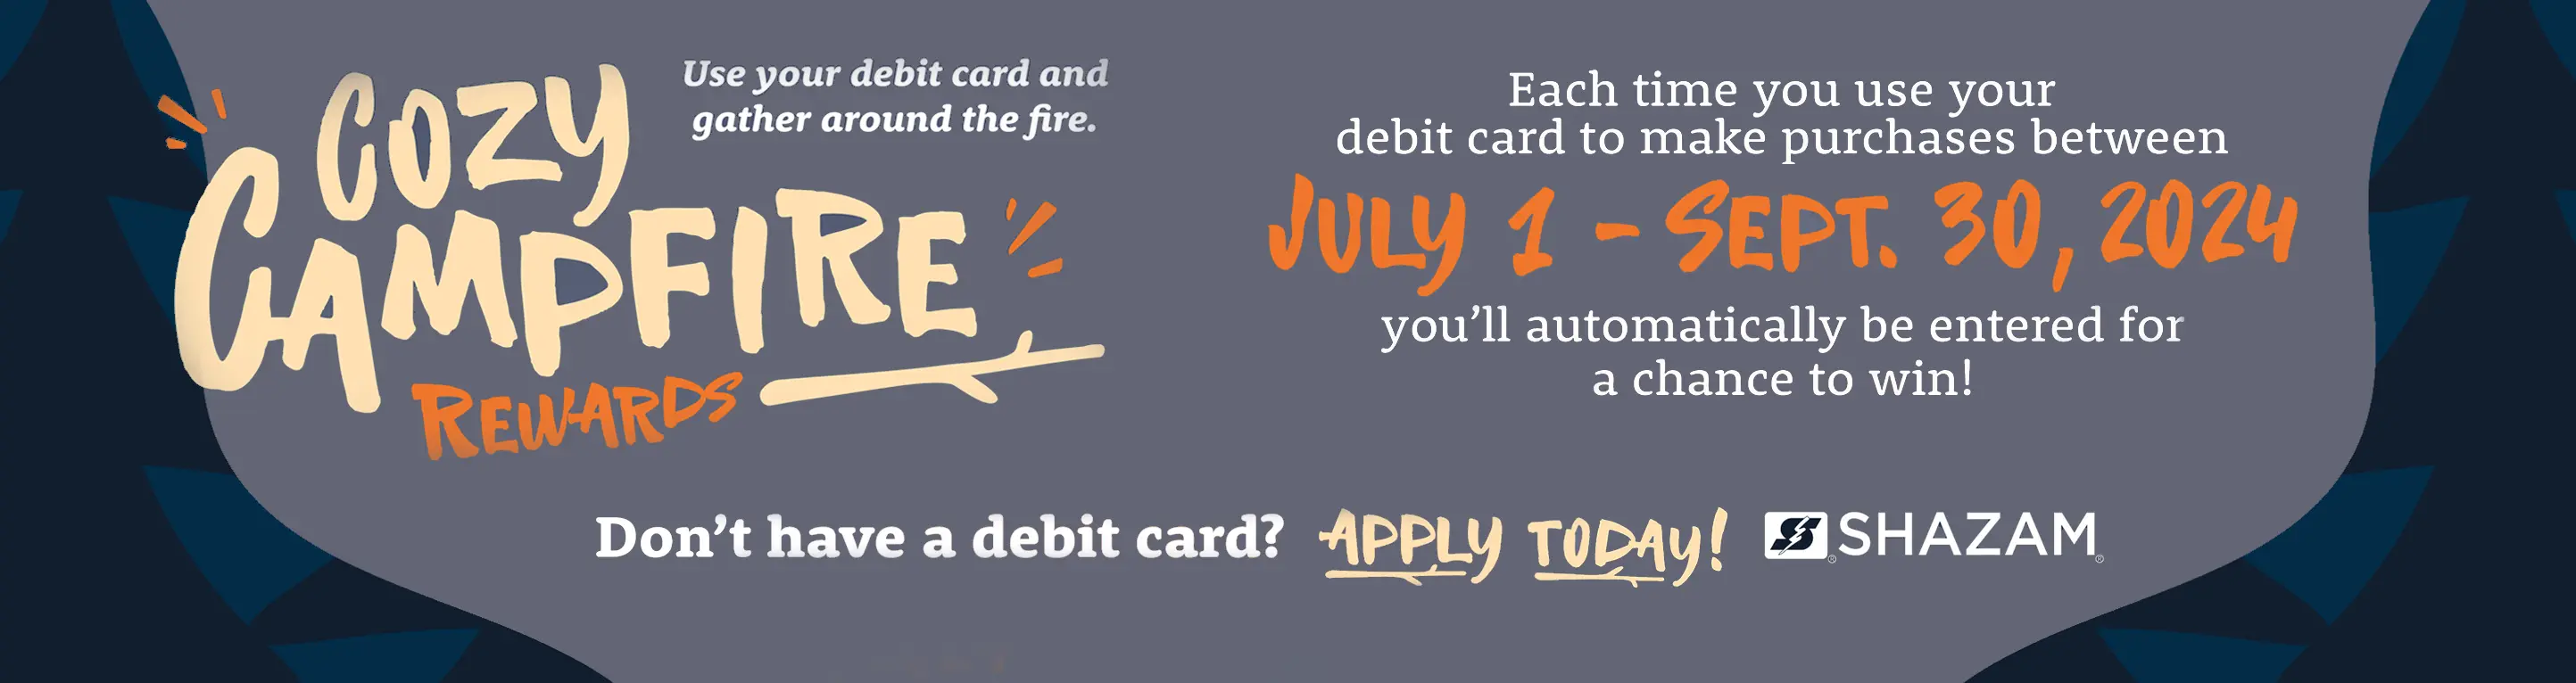 Cozy Campfire Rewards, use your debit card and gather around the fire. Each time you use your debit card to make purchases between July 1 and September 30, 2024, you'll automatically be entered for a chance to win!